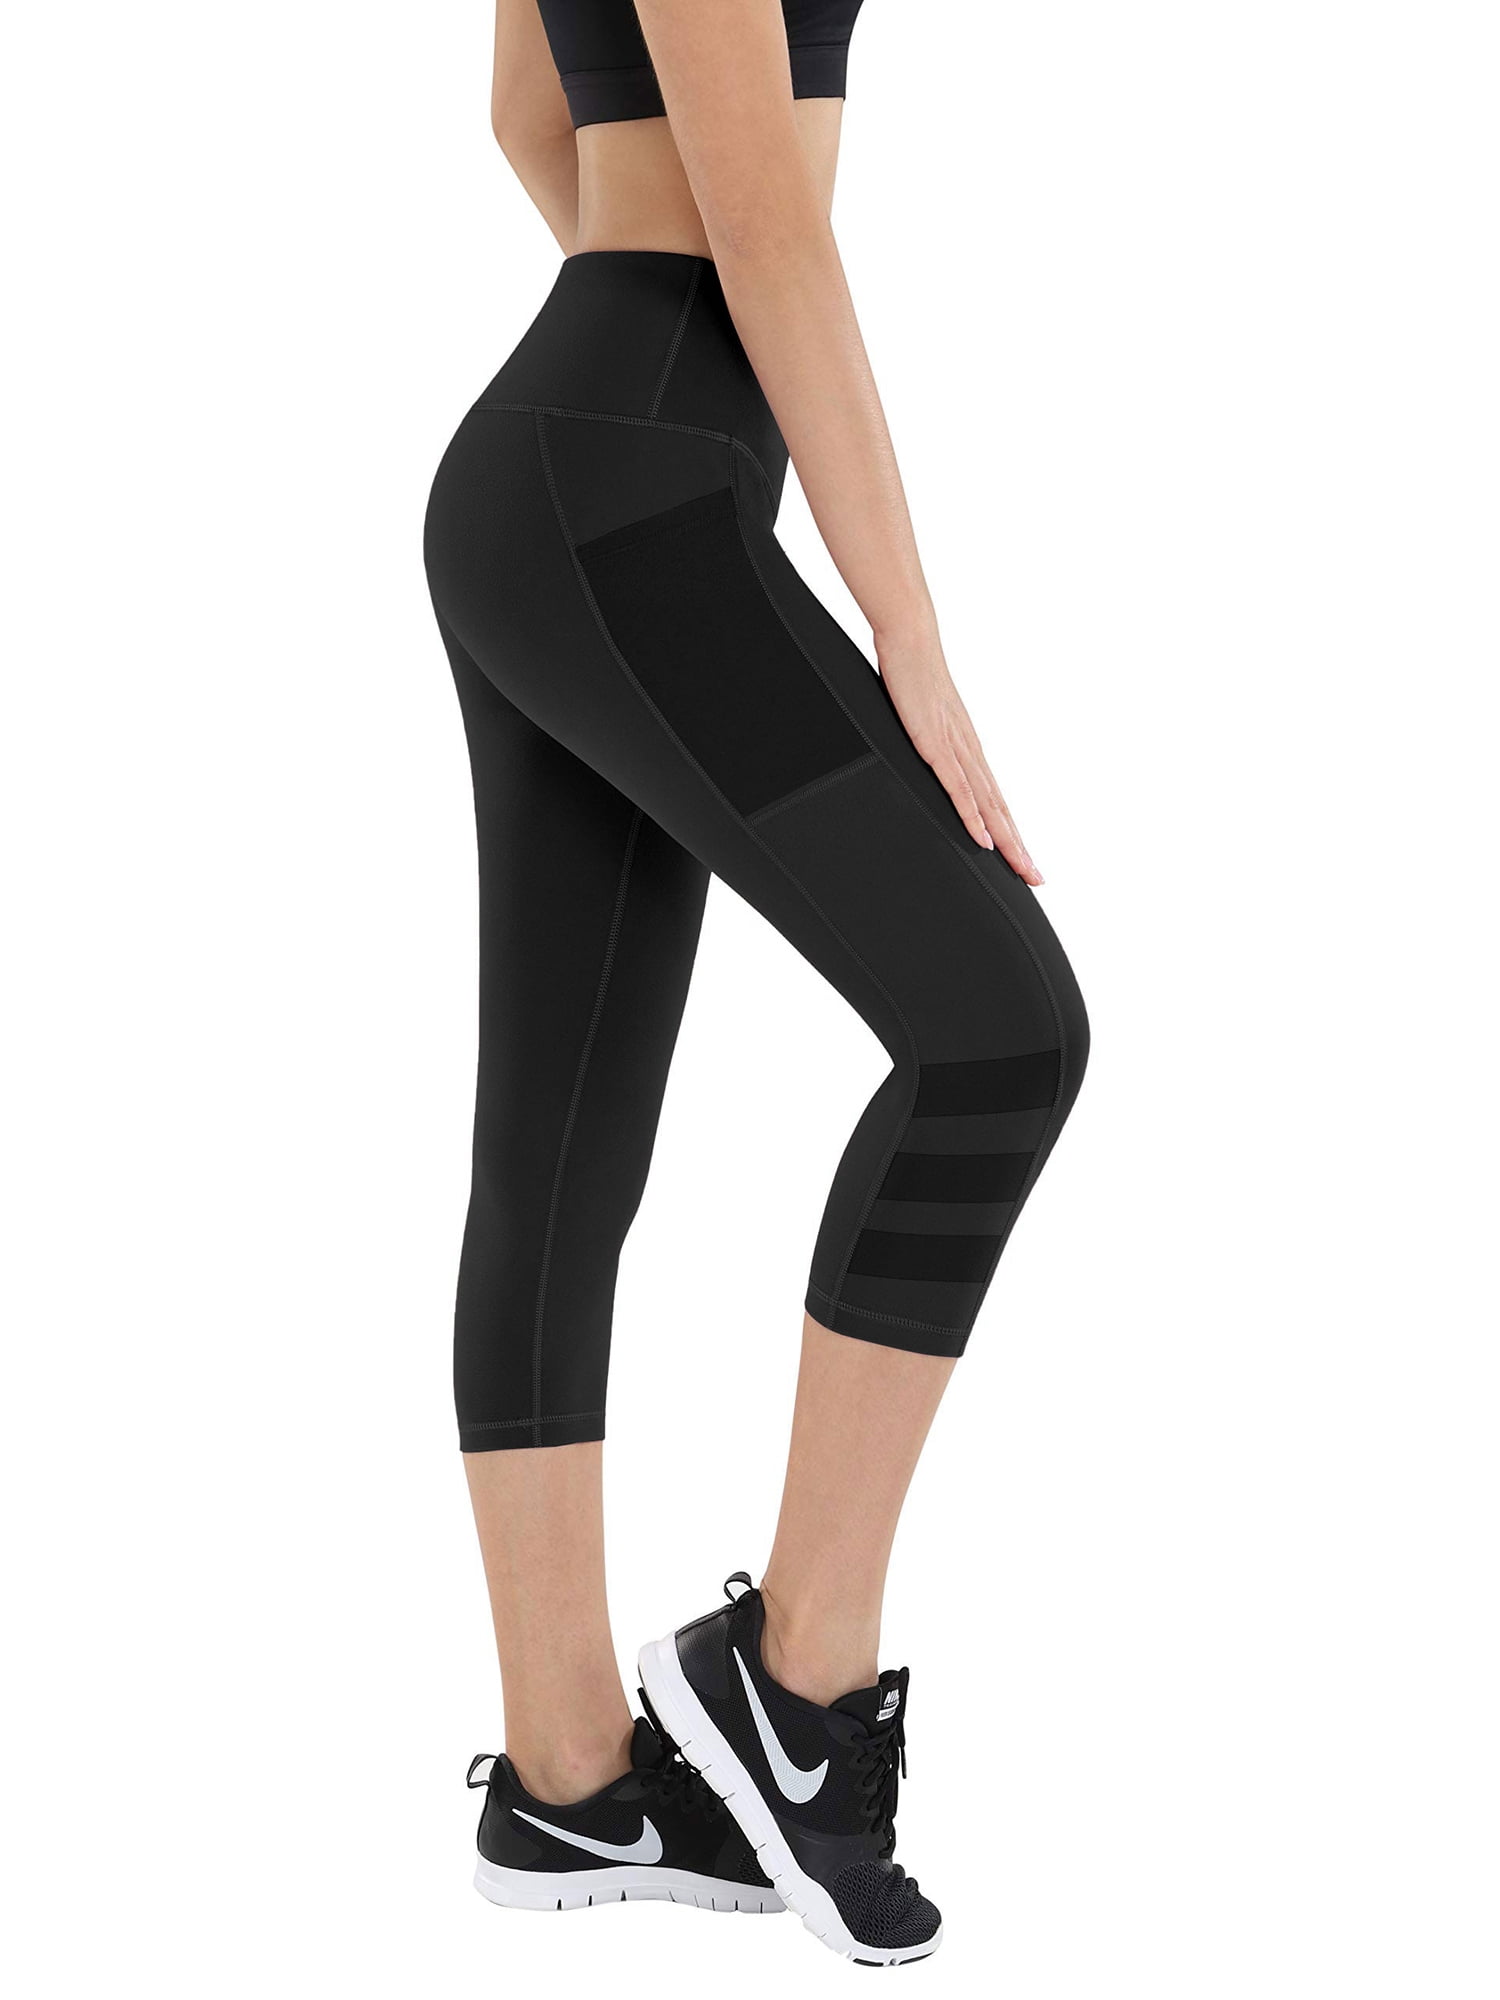 Sport Athletic Compression Tights Leggings 8601